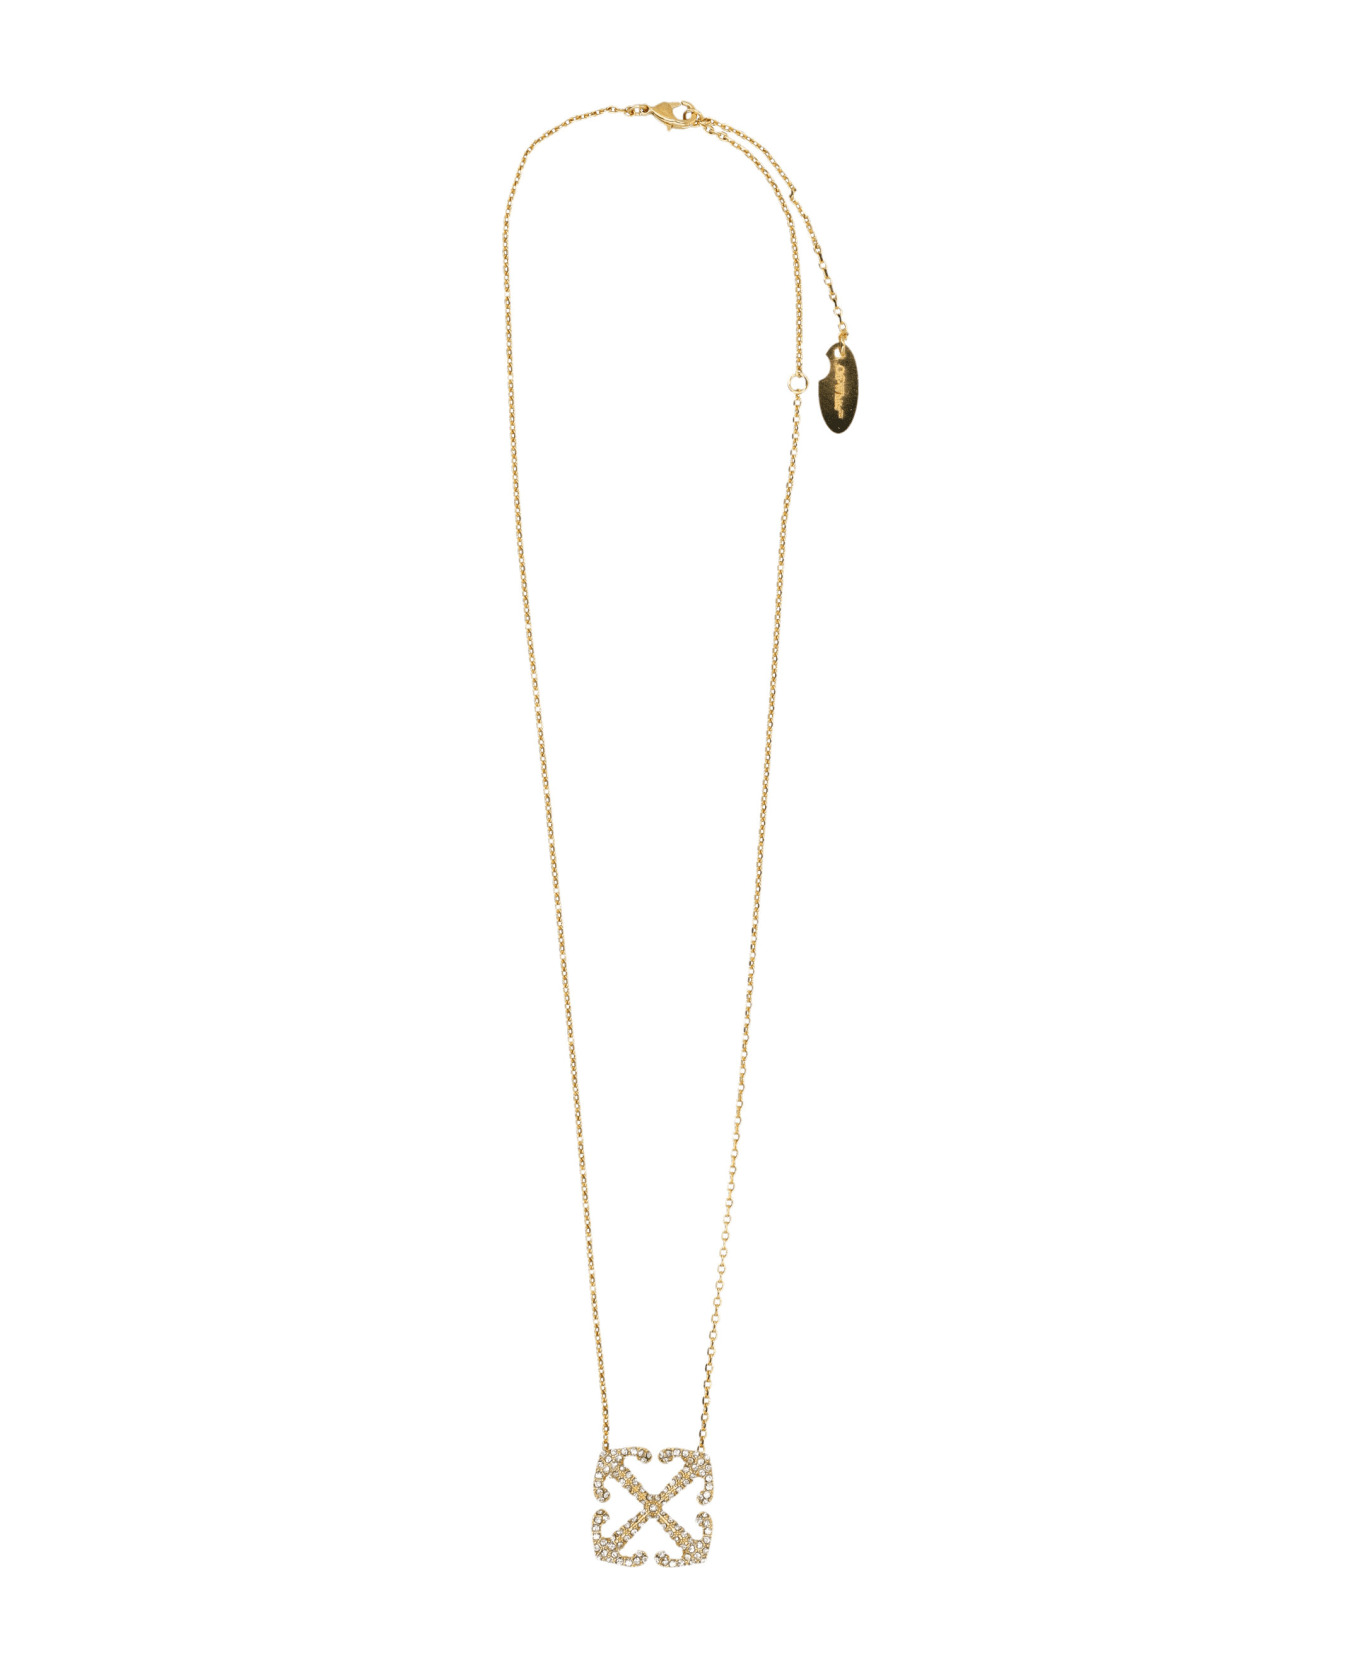 Off-White Arrow Pav? Pendant Necklace - GOLD ネックレス